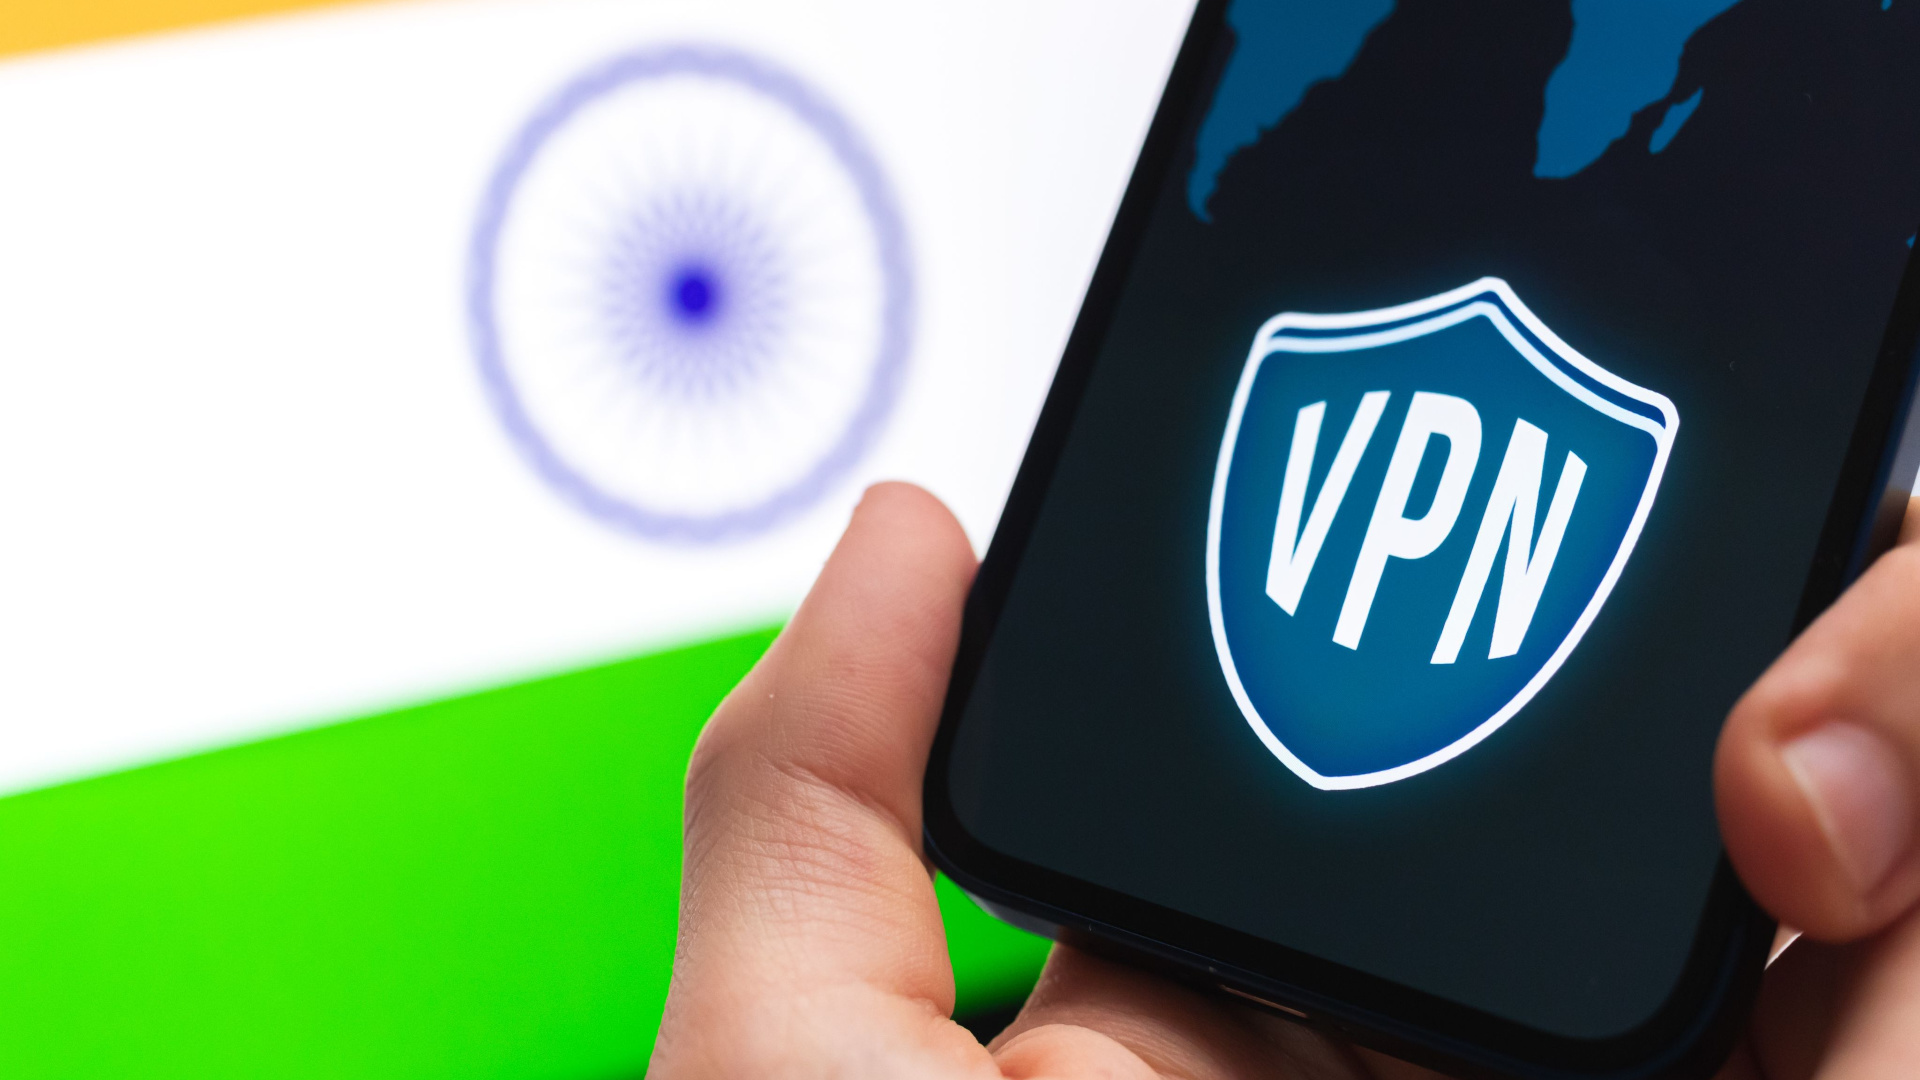 Hand holding smartphone with VPN logo on screen and Indian flag in background